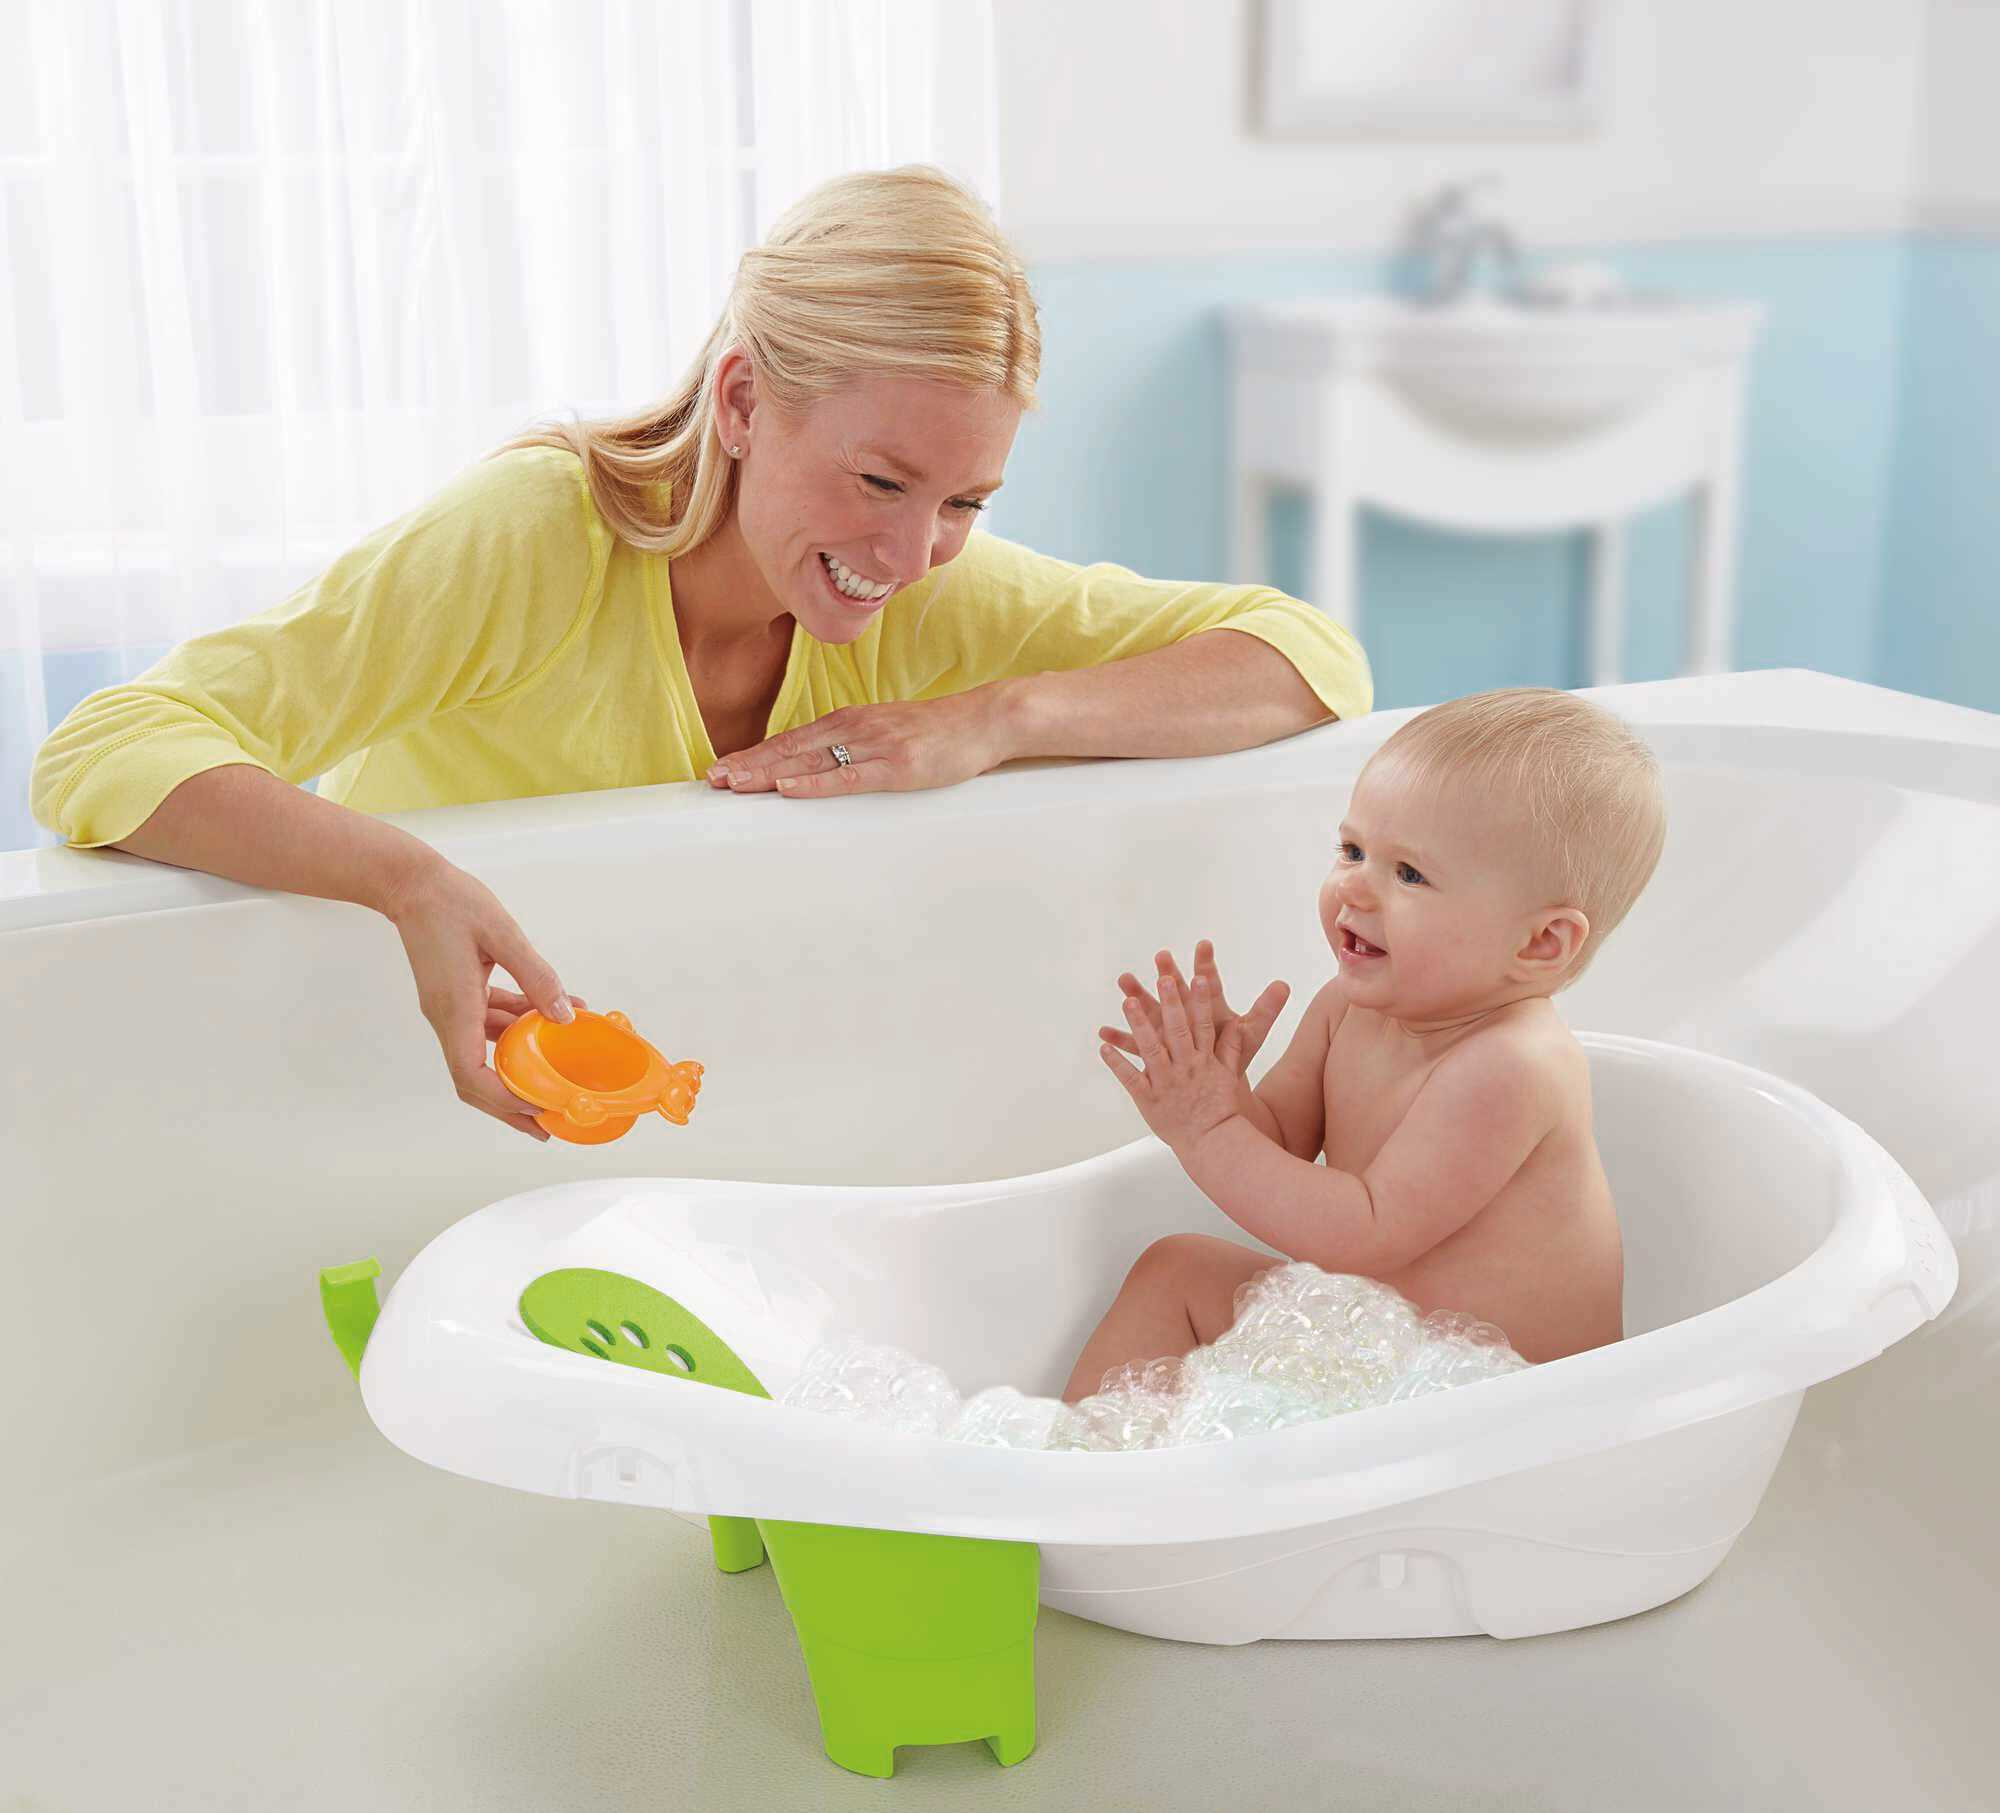 Fisher-Price 4-in-1 Sling ‘n Seat Tub Adjustable Baby Bath for Infant to Toddler with 2 Toys, Unisex - image 3 of 7